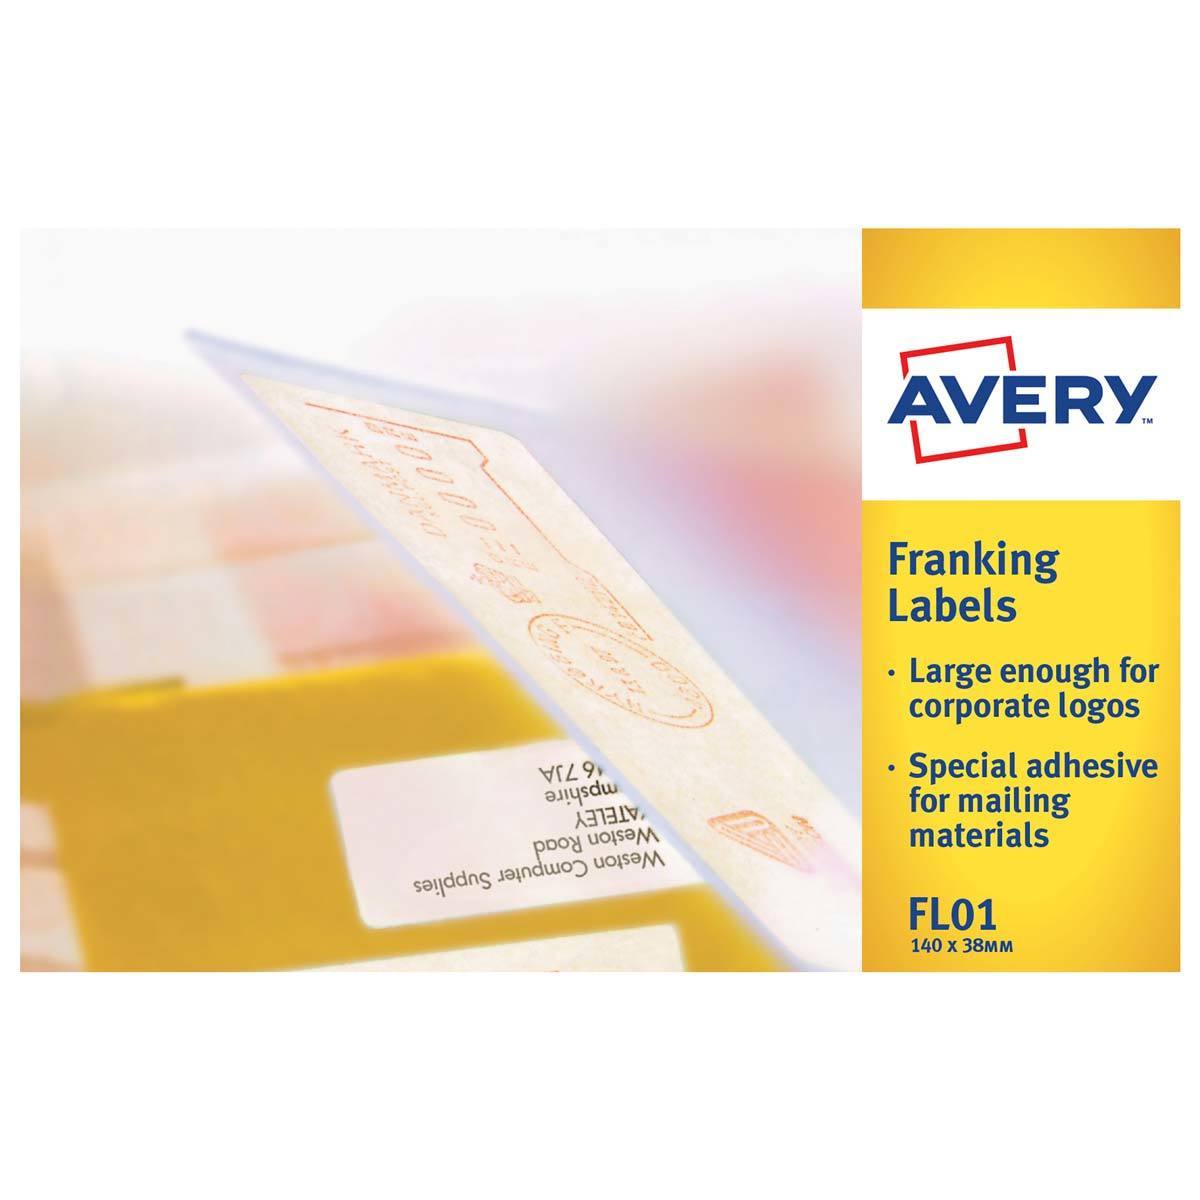 Avery Franking Labels 38.0 x 140.0mm, FL01, Pack of 1000